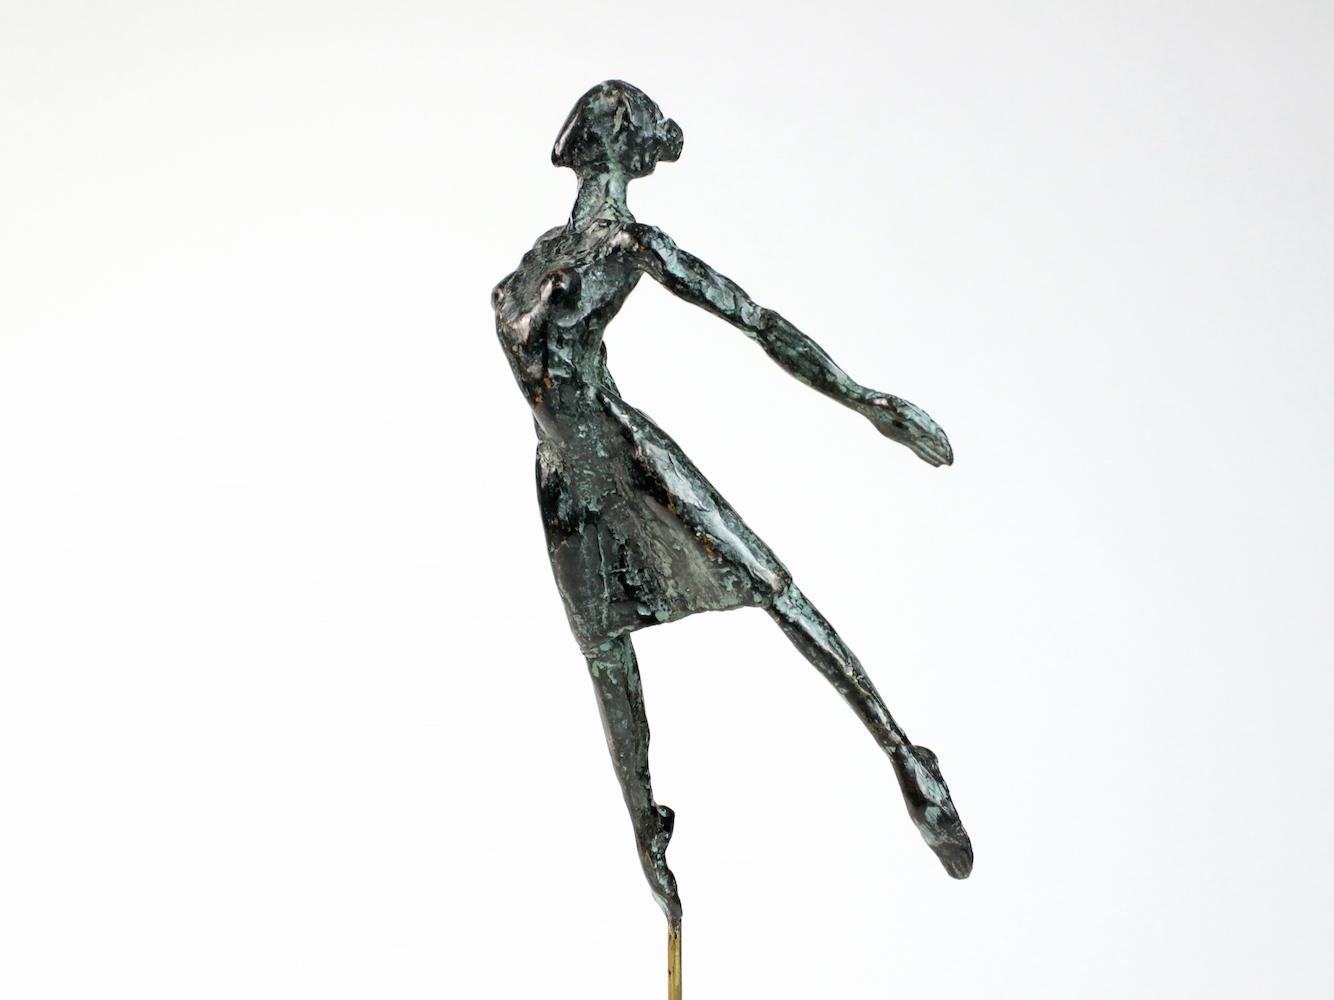 Danseuse Envolée is a bronze sculpture by contemporary artist Yann Guillon, dimensions are 25 cm × 10 cm × 5 cm (9.8 × 3.9 × 2 in). Height of the sculpture with the metal base: 45 cm (17.7 in). The sculpture is signed and numbered, it is part of a